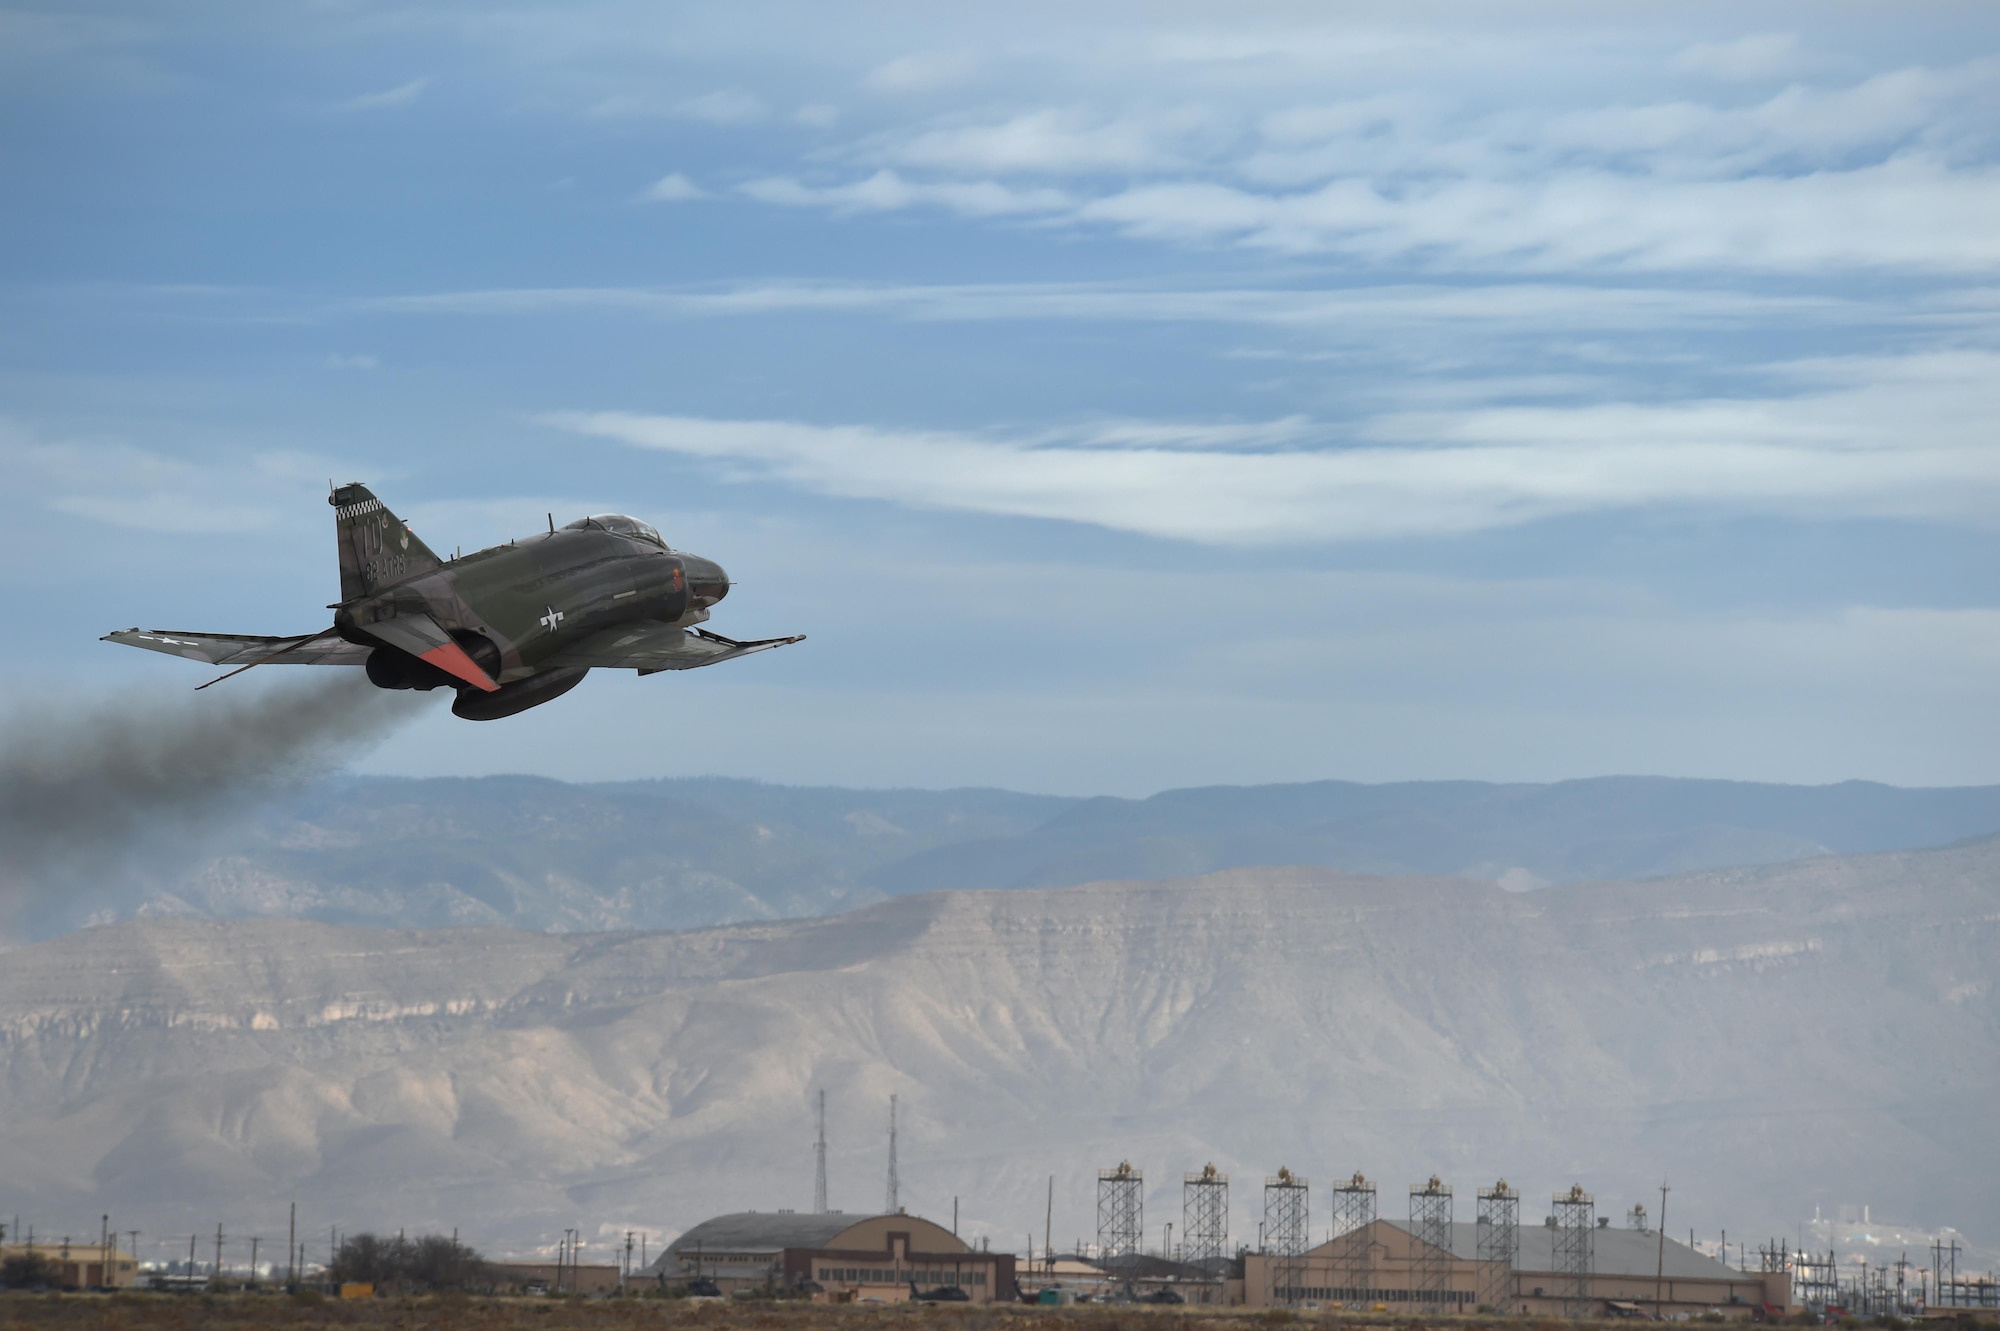 A QF-4 Phantom flies over Holloman Air Force, Base, N.M., during the Phinal Phlight event on Dec. 21, 2016. This event marks the end of the aircraft’s 53 years of service to the Air Force. (U.S. Air Force photo by Staff Sgt. Eboni Prince)